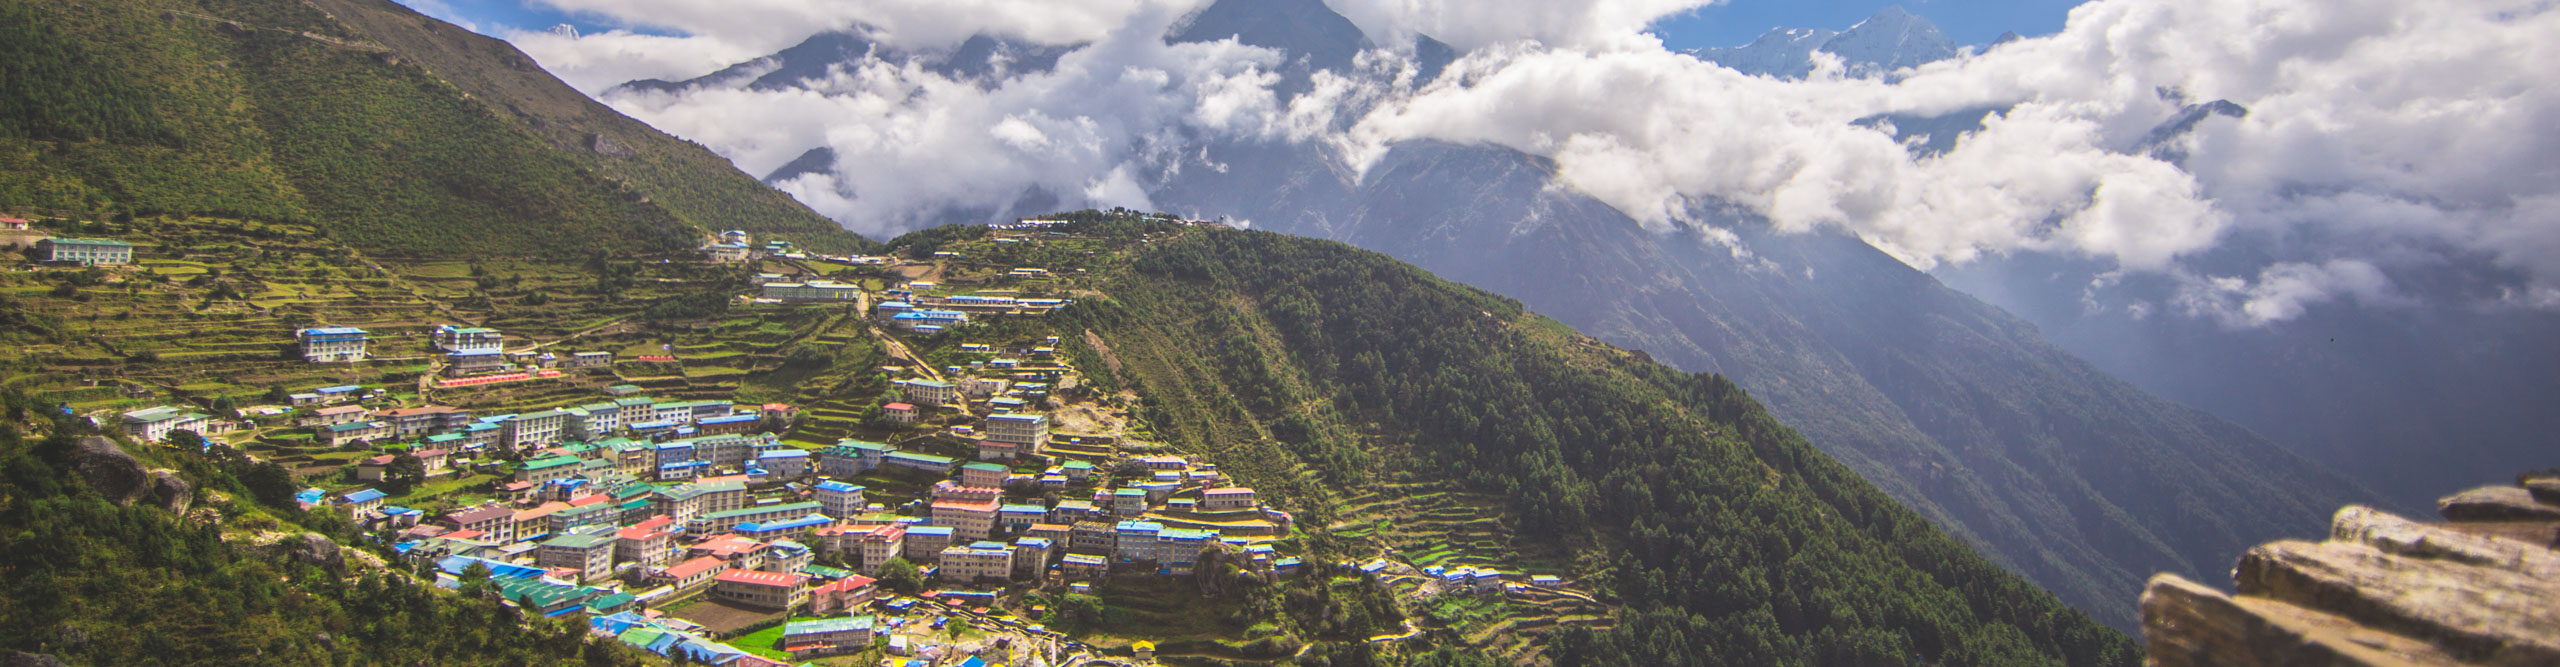 View of city on the side of a mountain in Nepal, on a cloudy day 